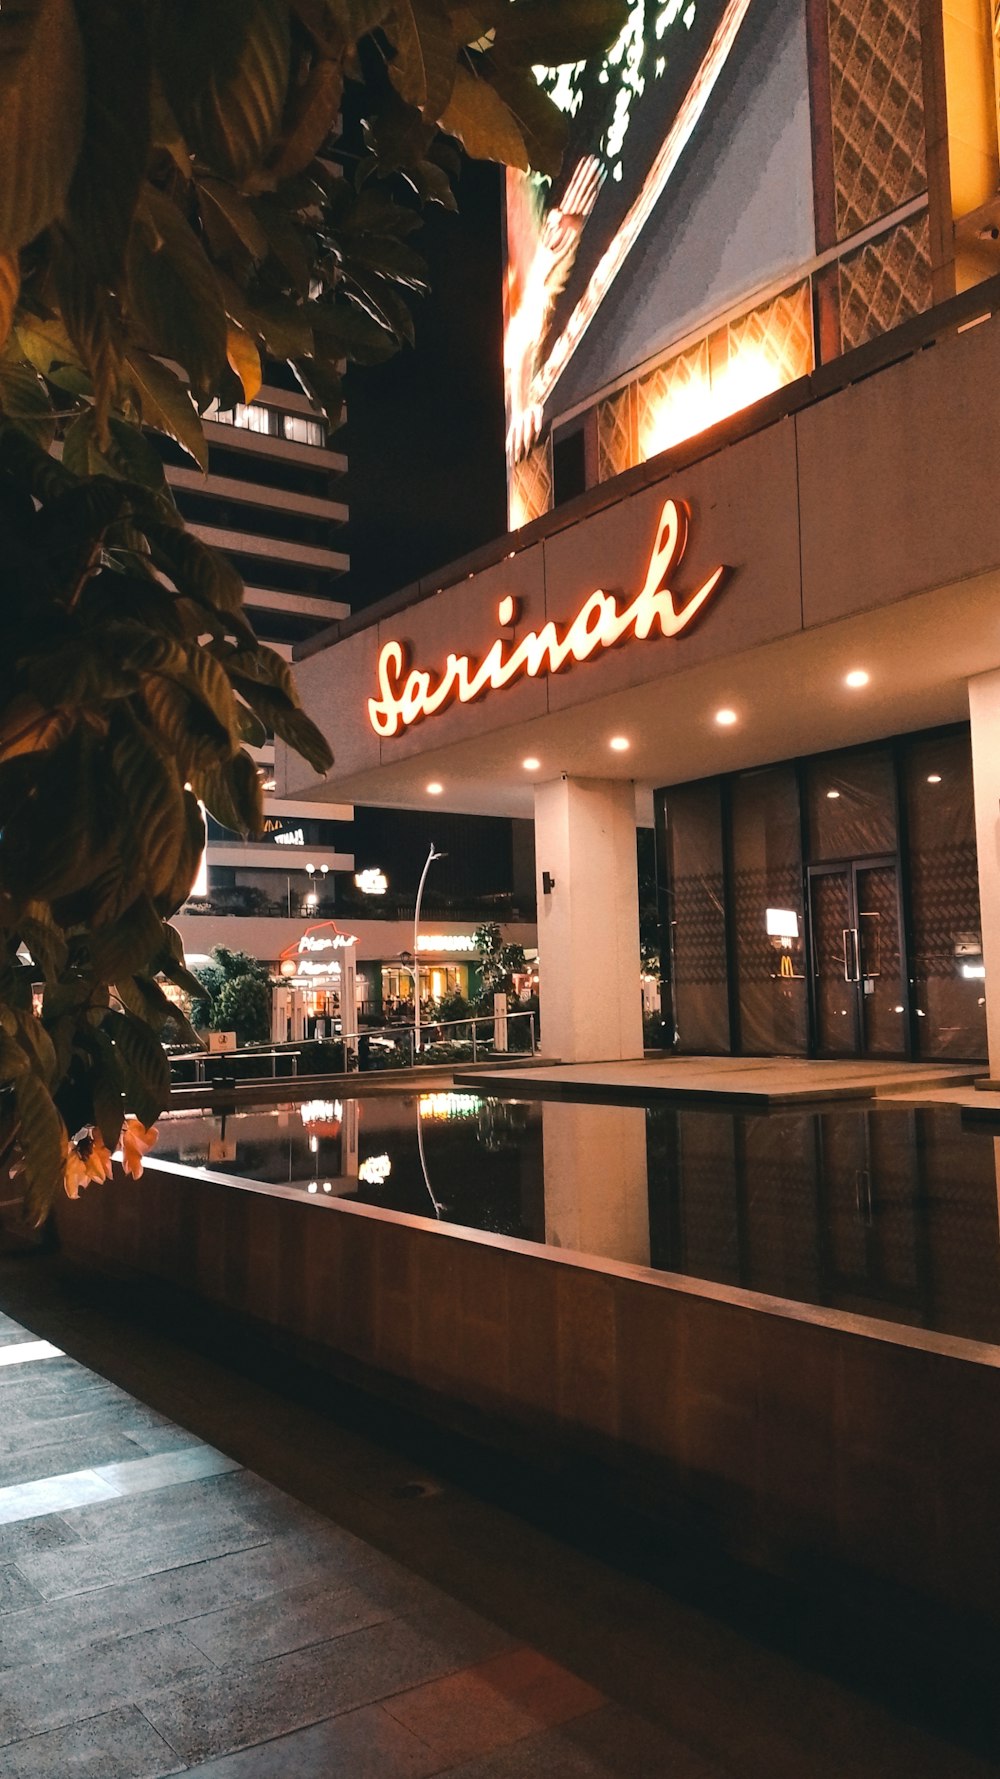 a building that has a sign that says sunnah on it